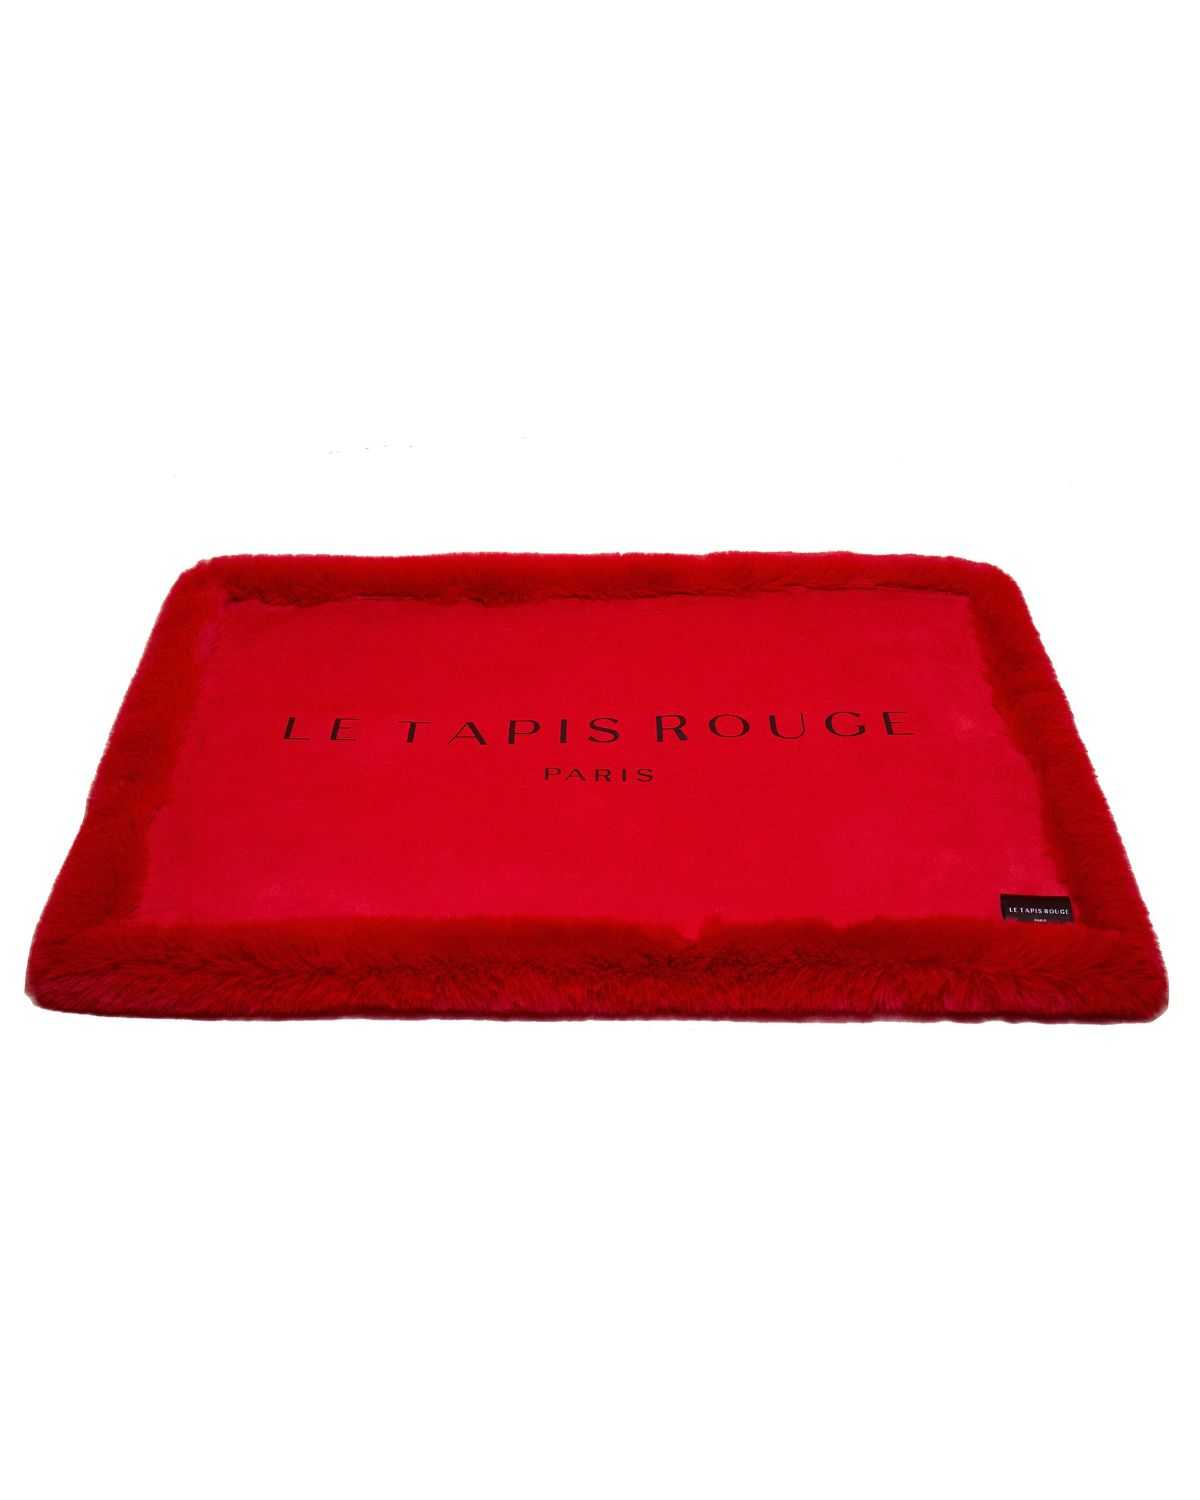 Le Tapis Paris | Le Tapis Rouge Paris | Luxury synthetic fur rug for dogs and cats